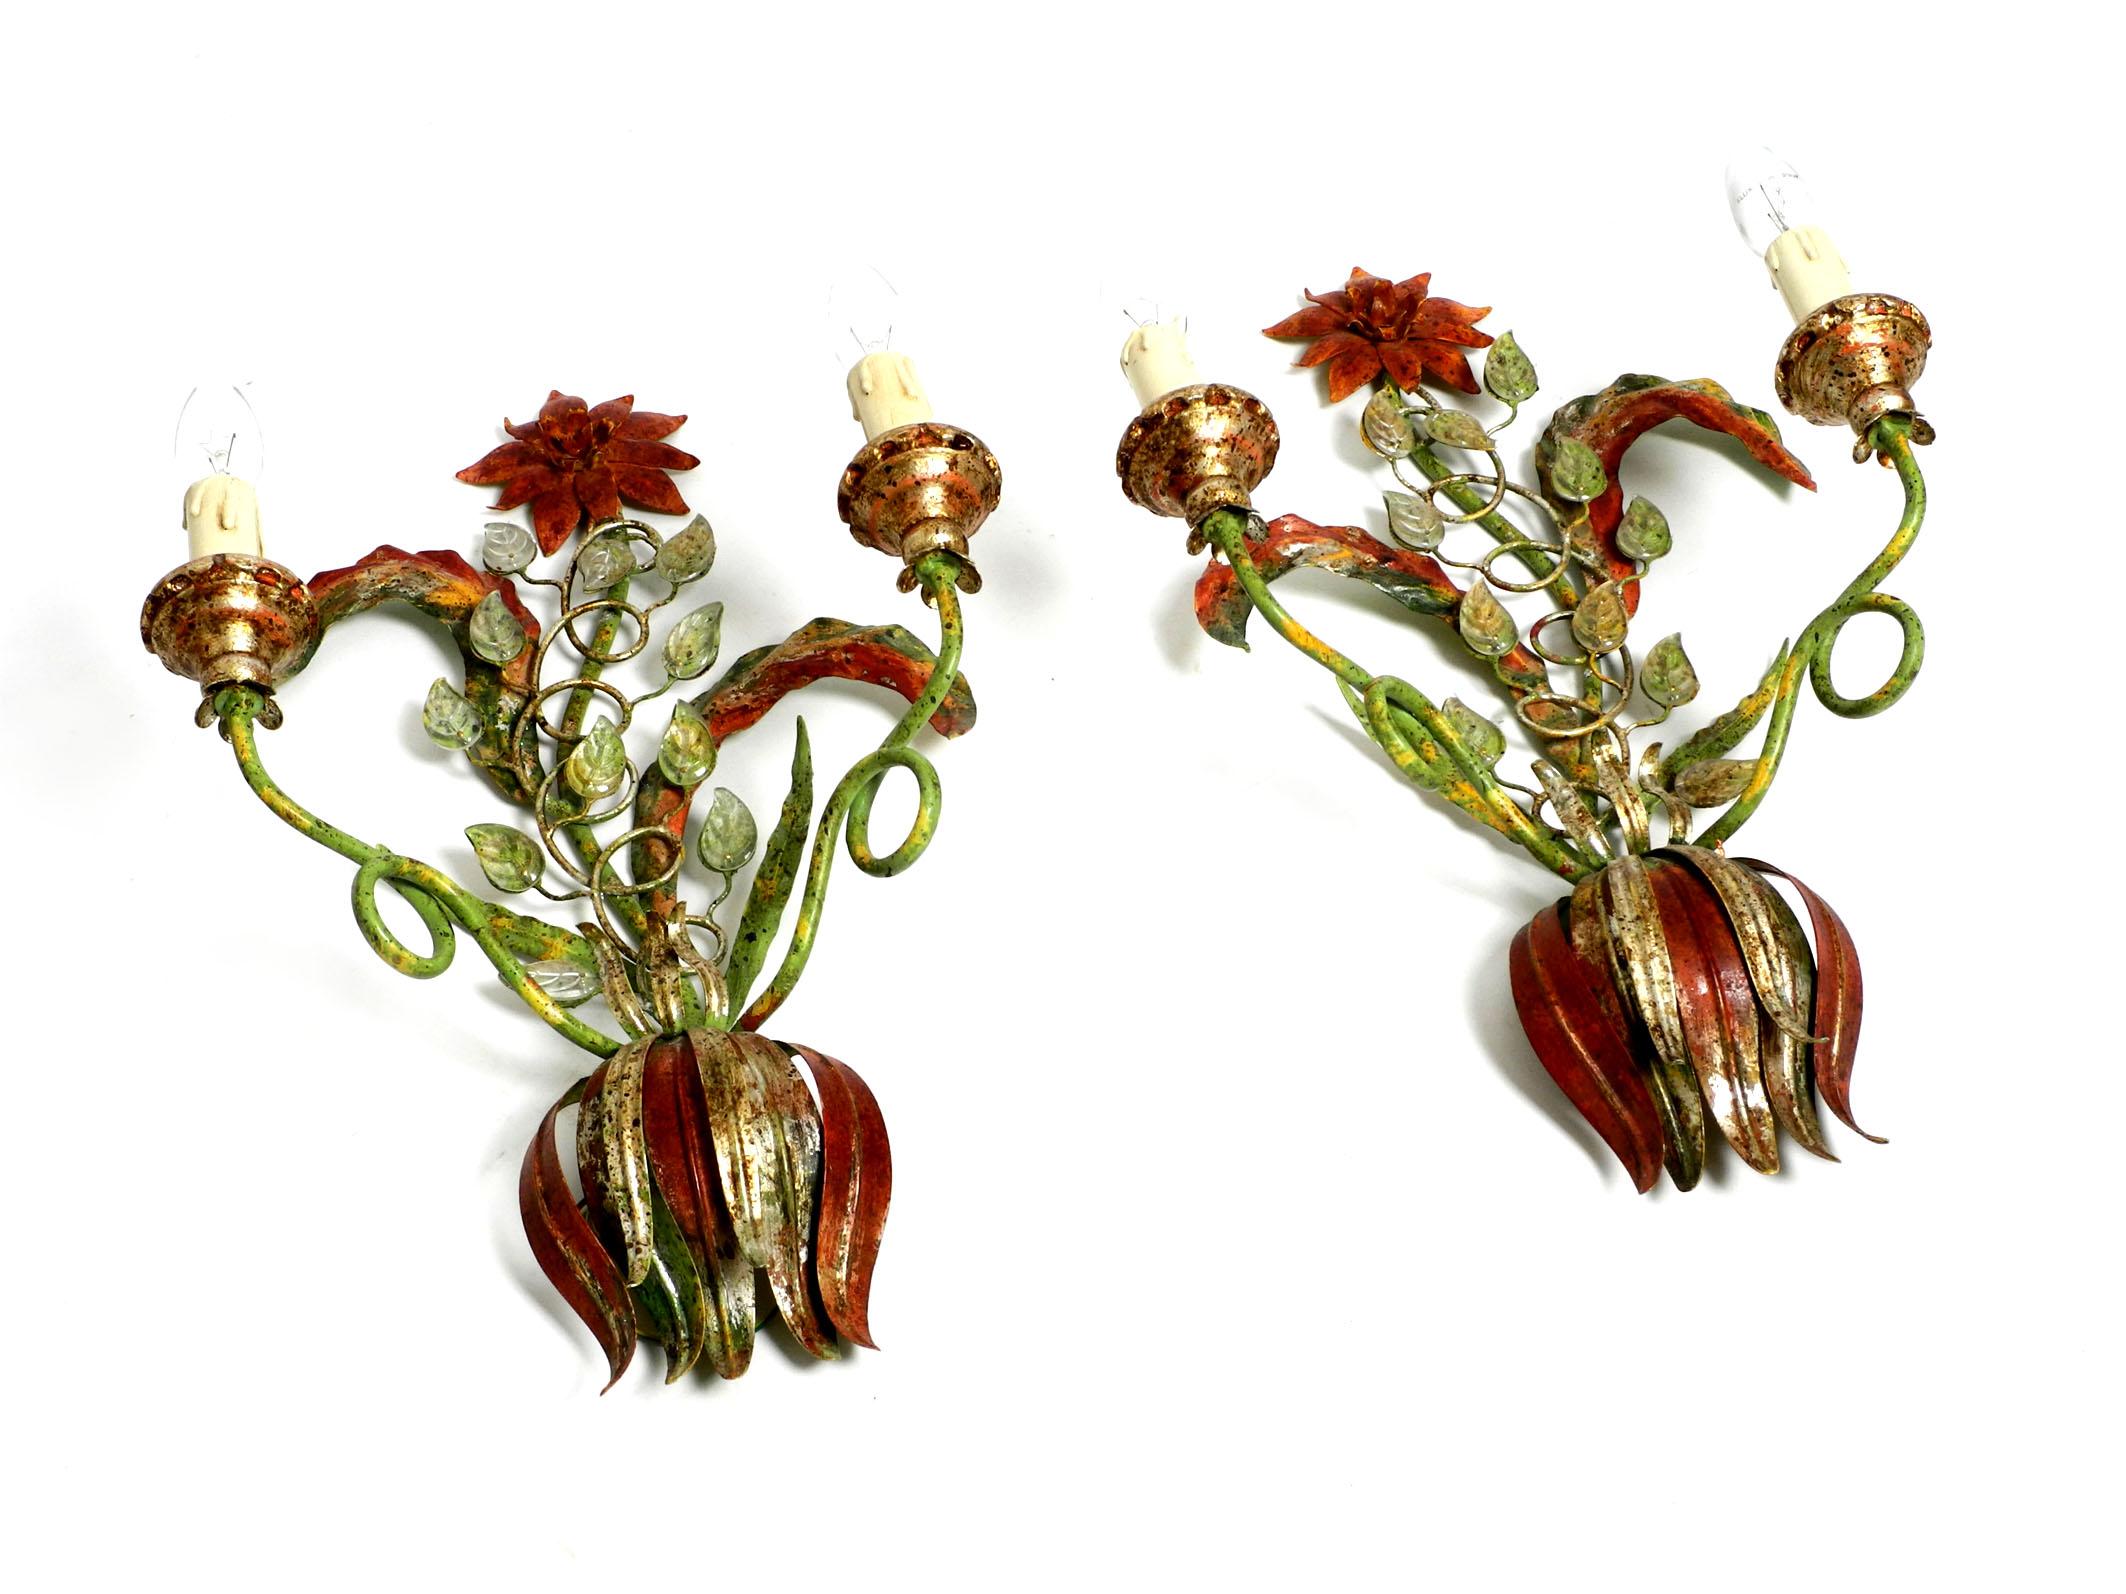 Pair of beautiful large floral Italian Mid-Century Modern metal wall sconces. Solid and high quality production. Elegant Italian design of the 1950s.
The frame with the leaves is made of green and brown-red lacquered metal.
Glass stones are